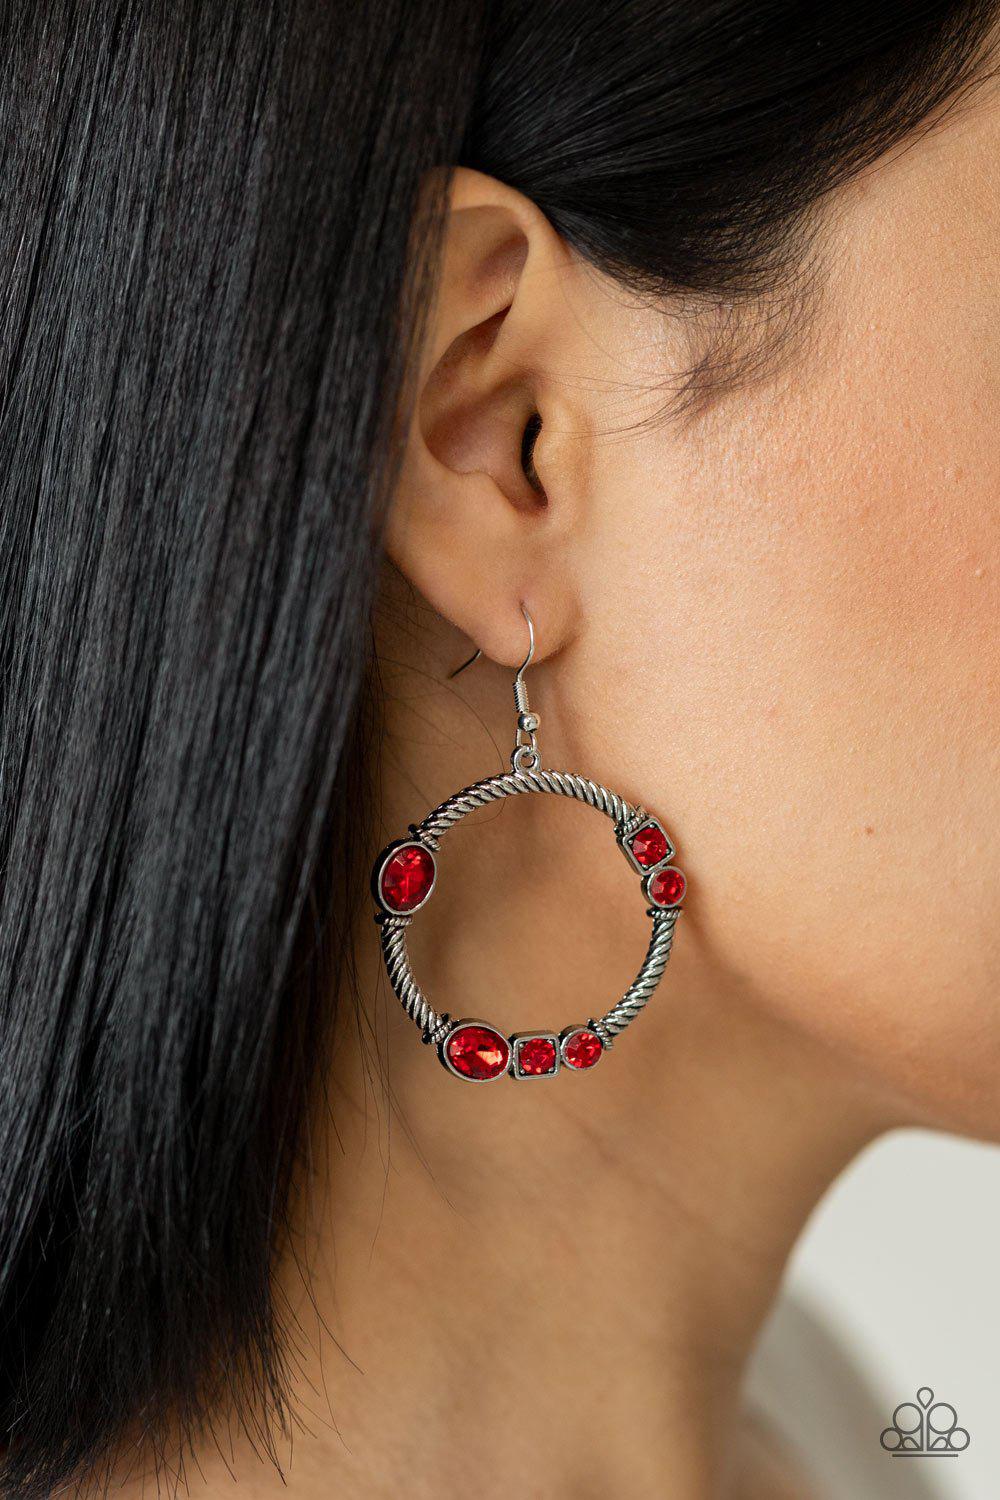 Glamorous Garland Red Rhinestone and Silver Earrings - Paparazzi Accessories- model - CarasShop.com - $5 Jewelry by Cara Jewels